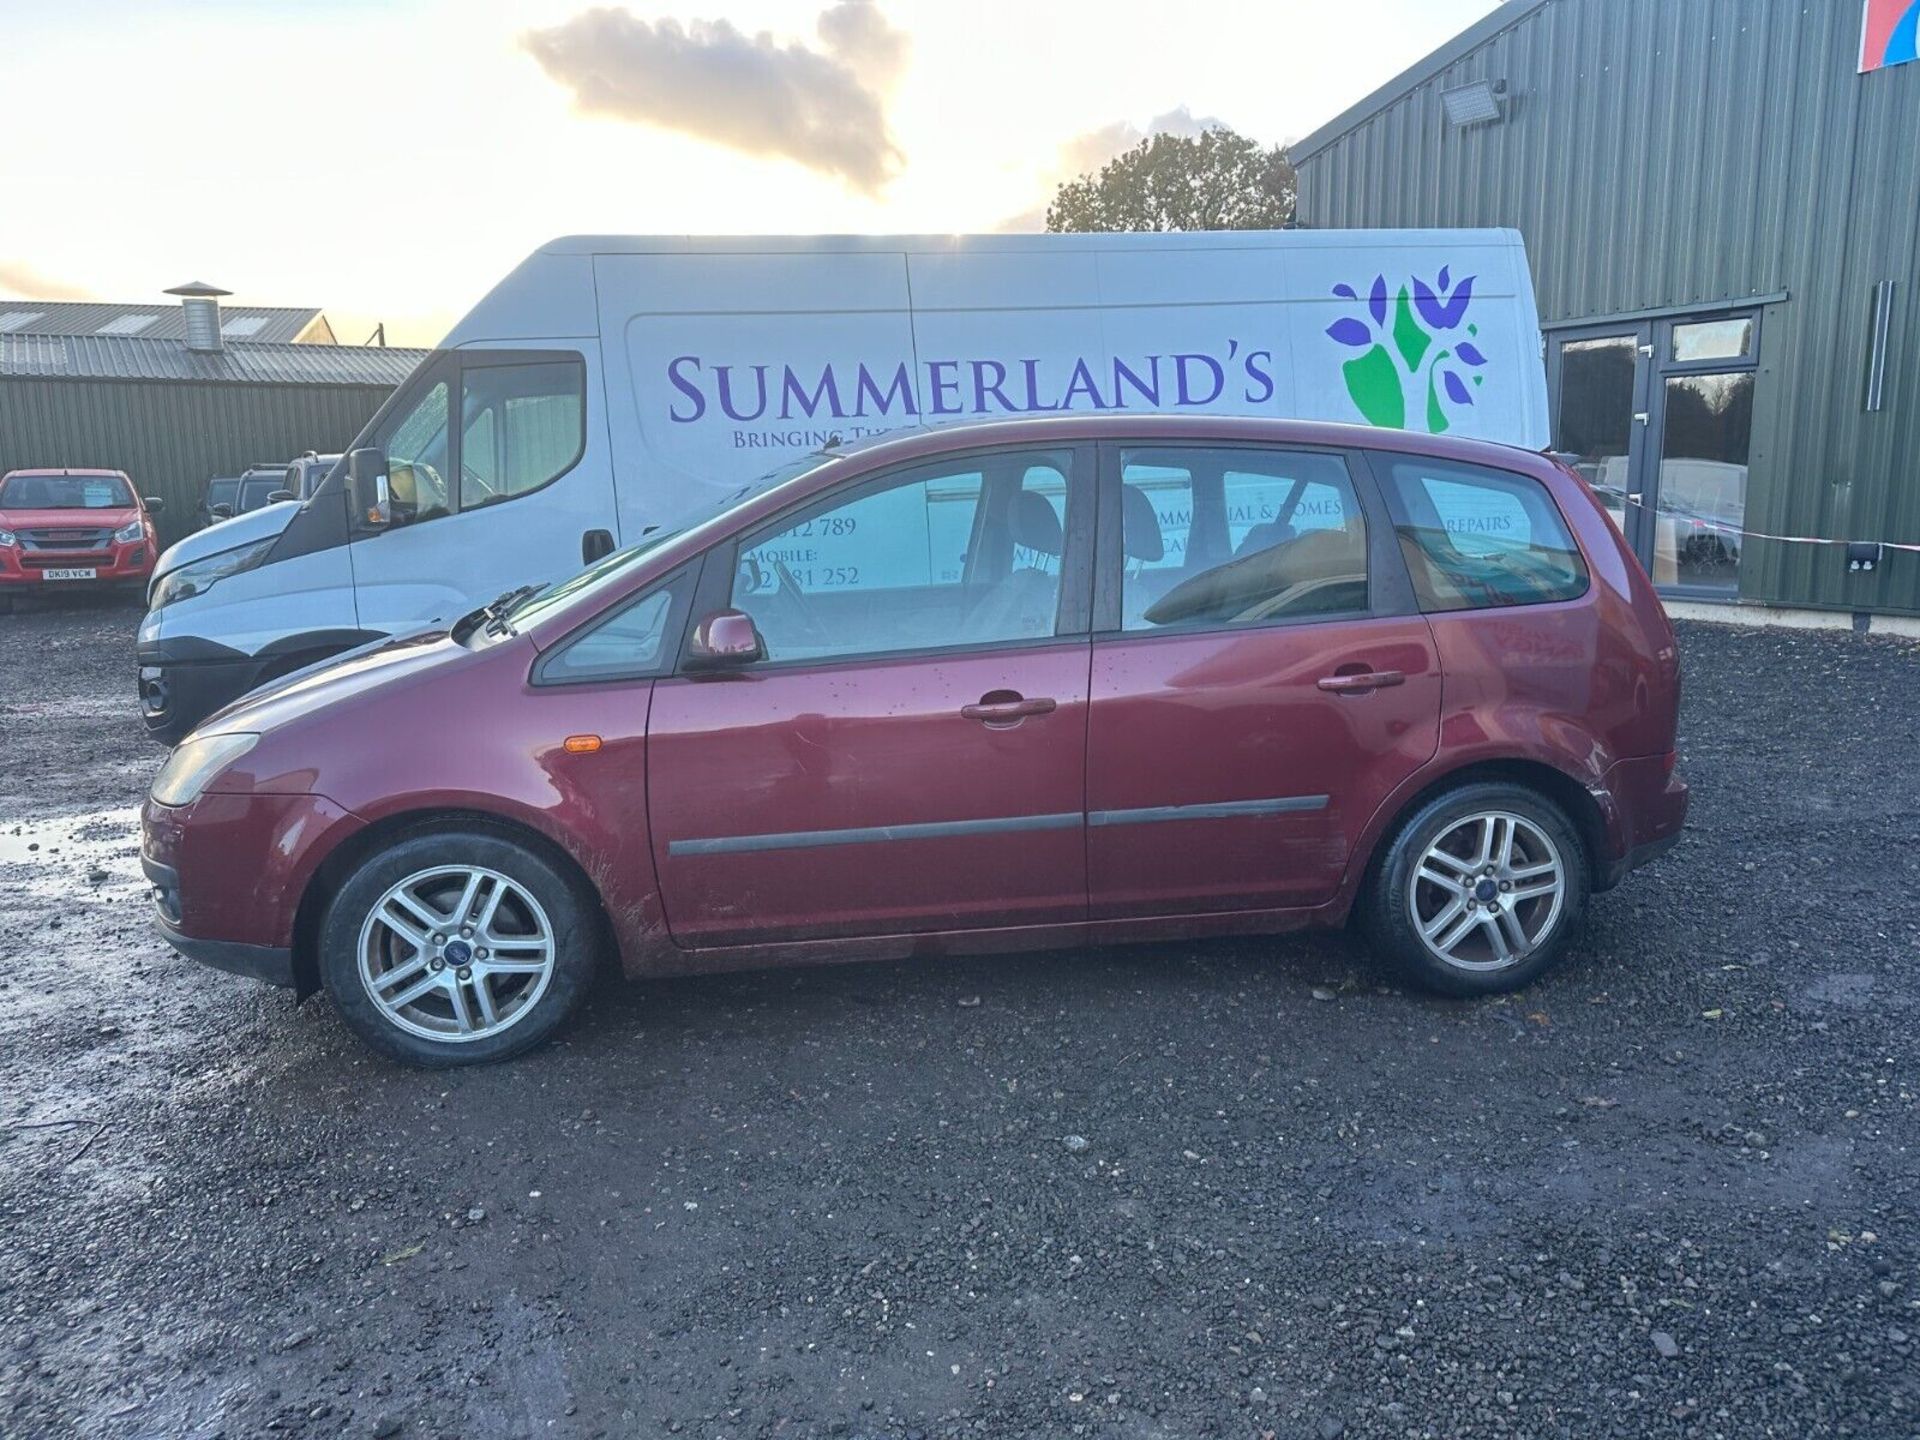 STYLISH BARGAIN: RED 2005 FOCUS C-MAX ESTATE - A CLEAR CHOICE (NO VAT ON HAMMER)